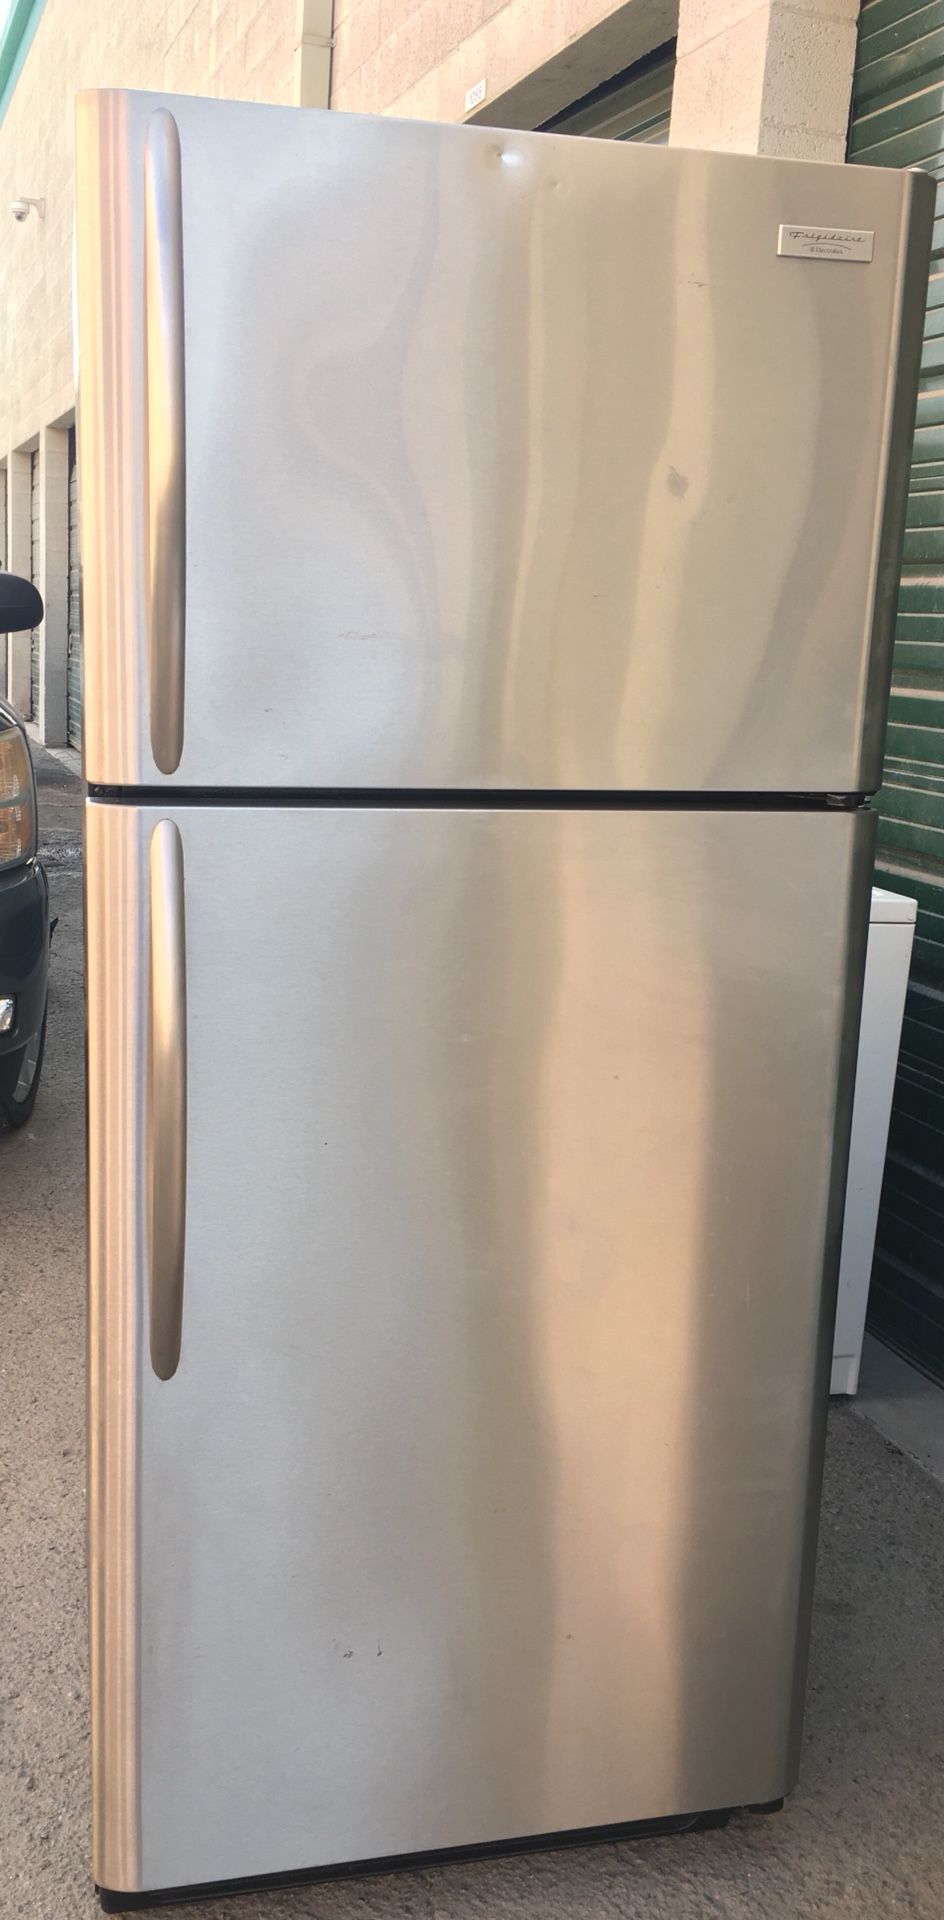 LIKE NEW TOP FREEZER REFRIGERATOR 21CU,FT W/ICE MAKER DELIVERY SERVICE SAME DAY..: